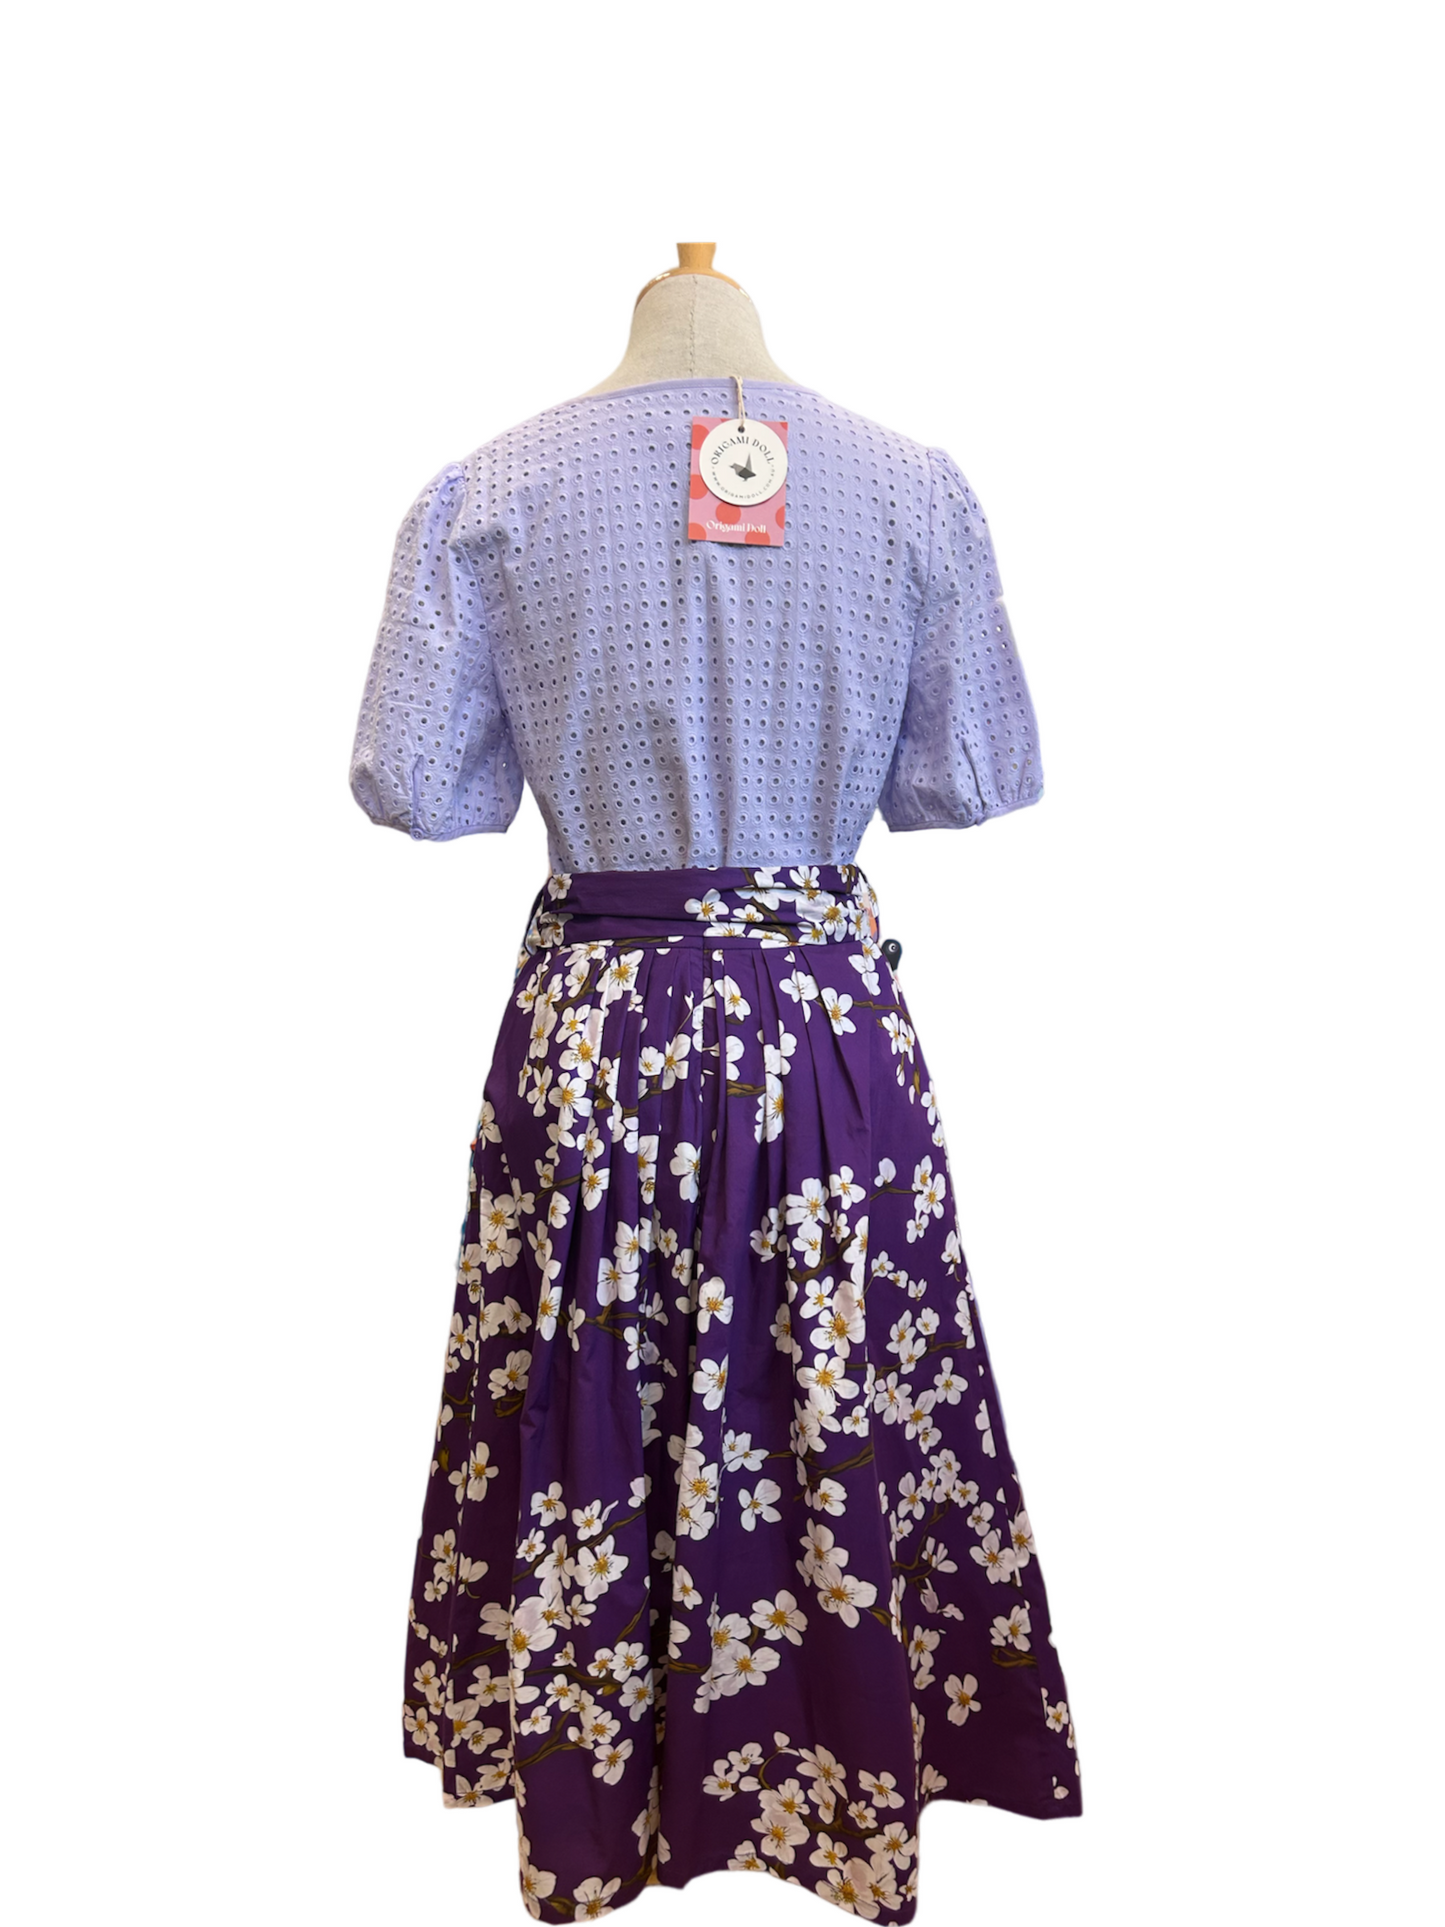 Camila Skirt - cherry blossom purple (size 8 & 14 ONLY)